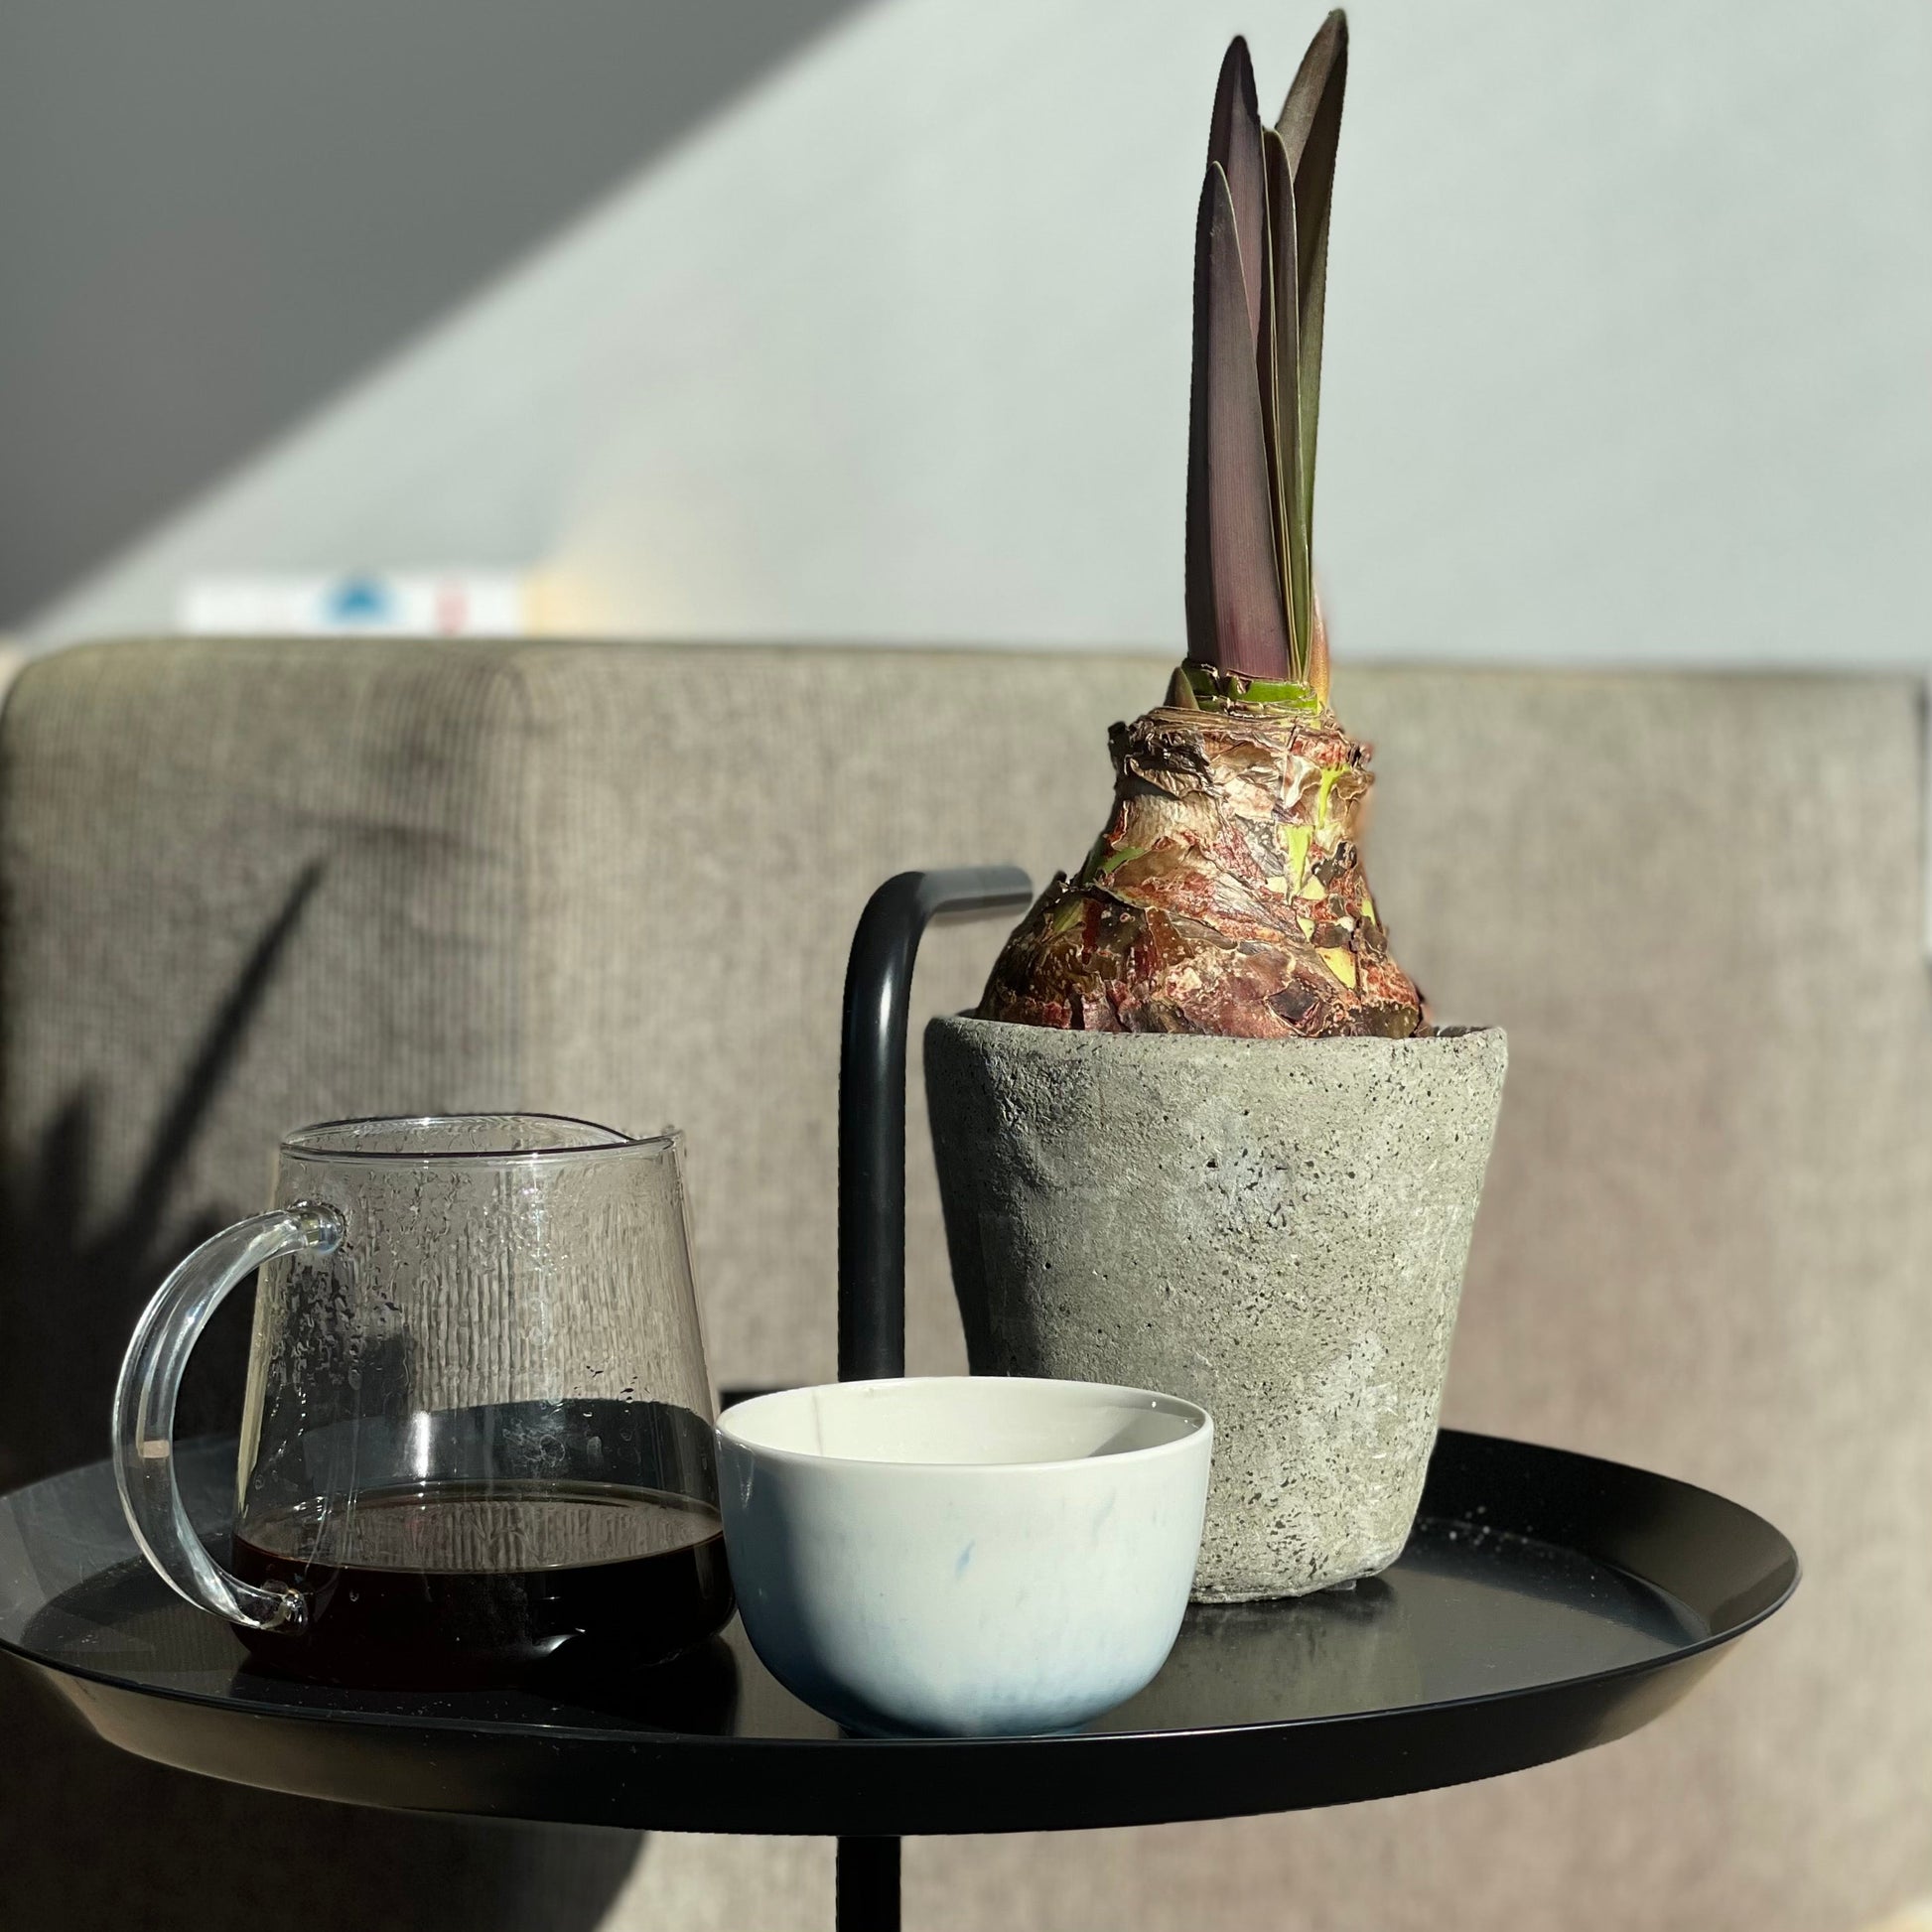 A glass server of half filled with coffee, placed next to a ceramic bowl and a house plant of a metal black table